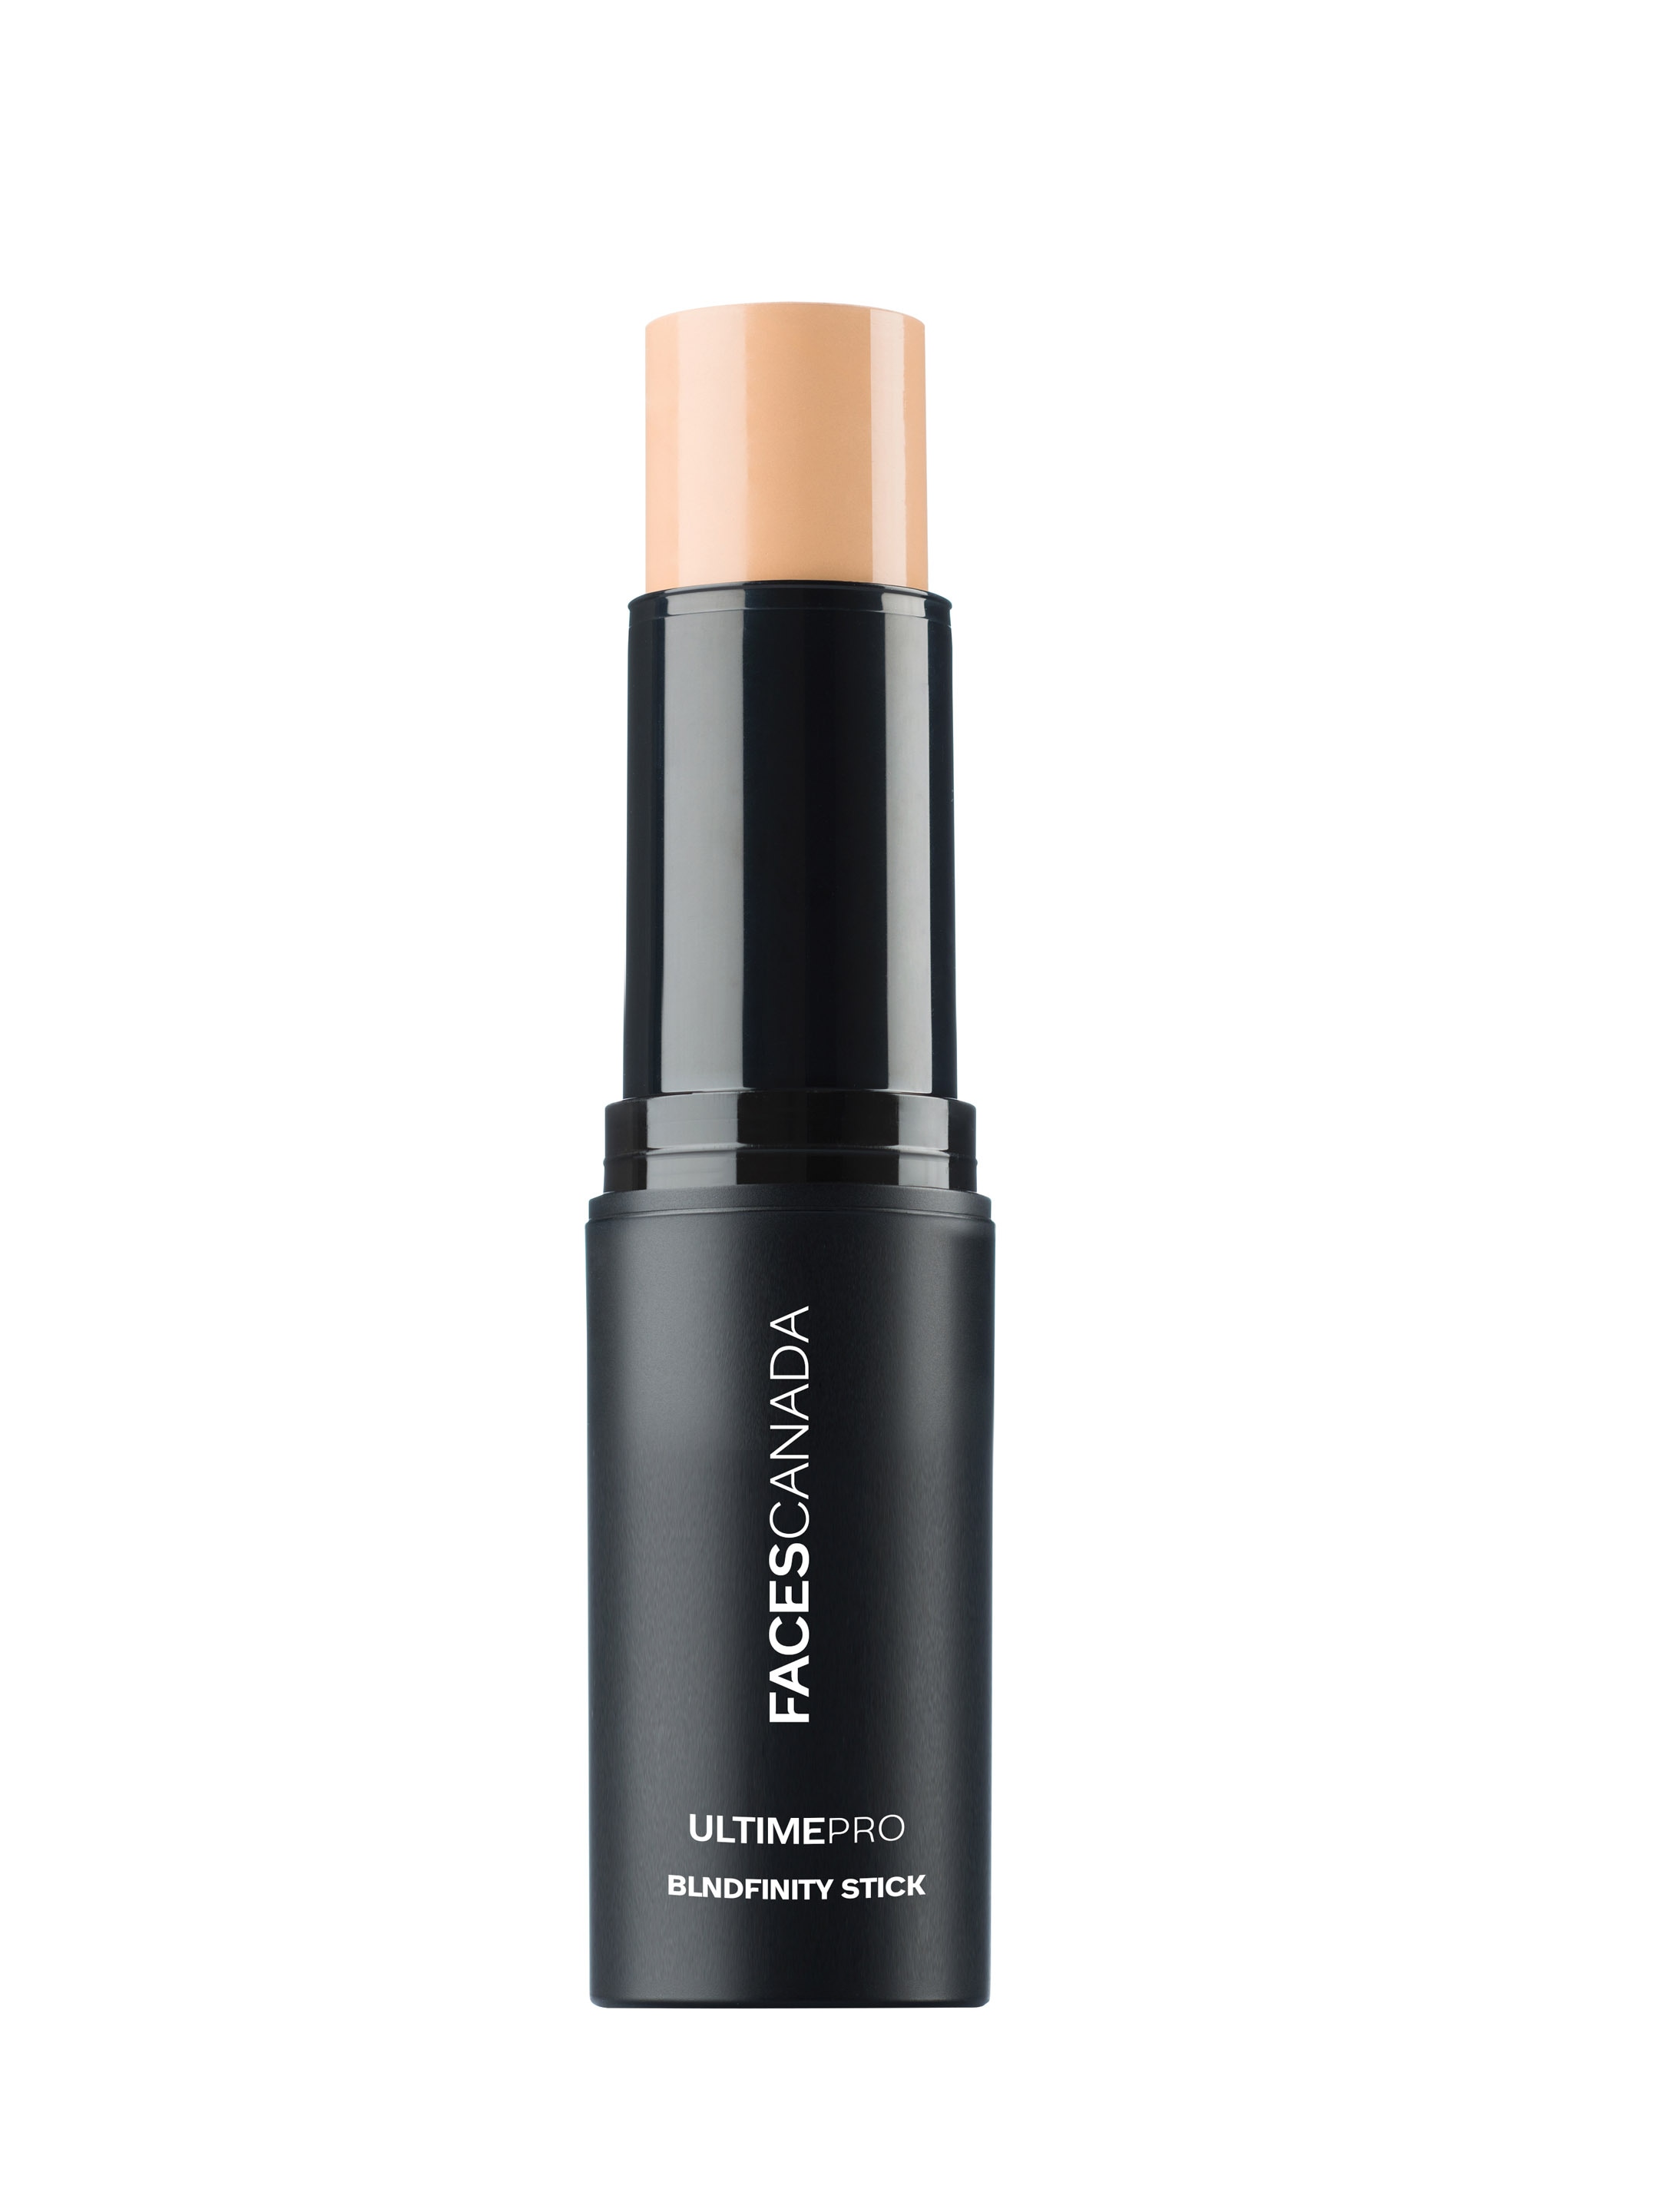 FACES CANADA Ultime Pro Blendfinity Stick Foundation - Natural 02 11gm Price in India